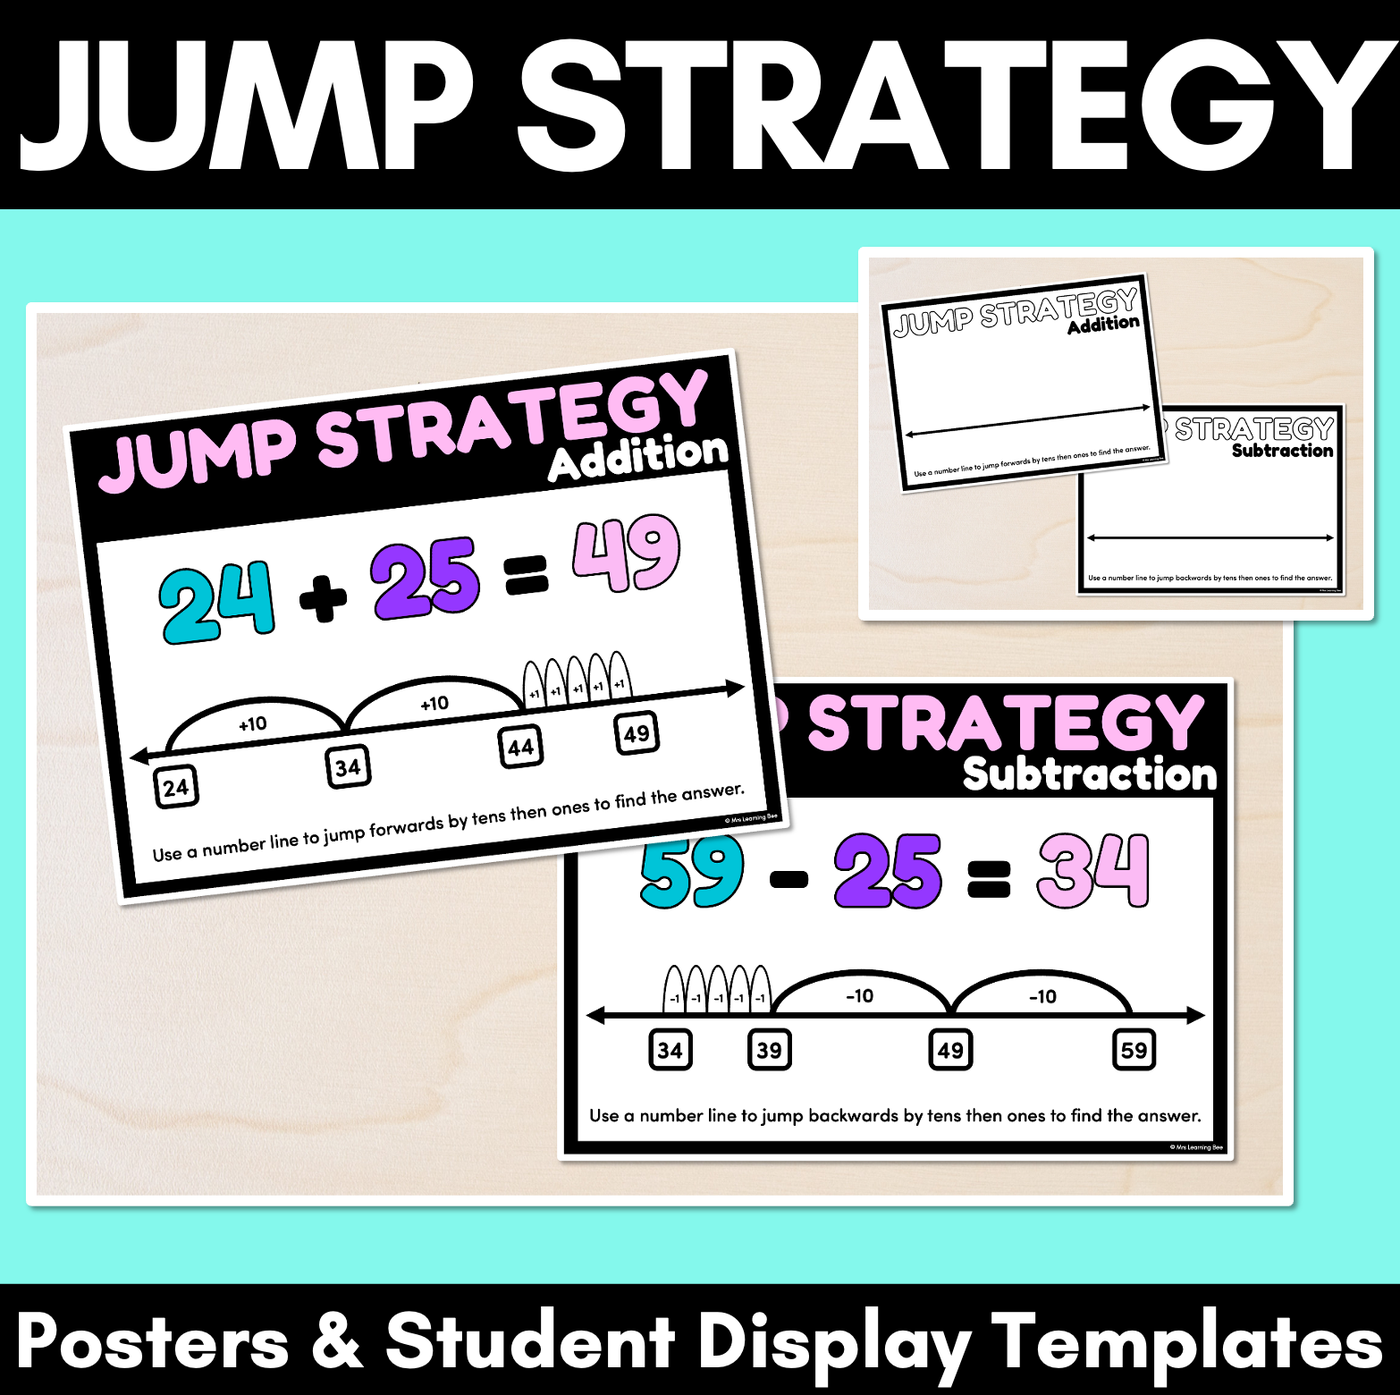 Jump Strategy Addition & Subtraction - Posters & Student Display Templates